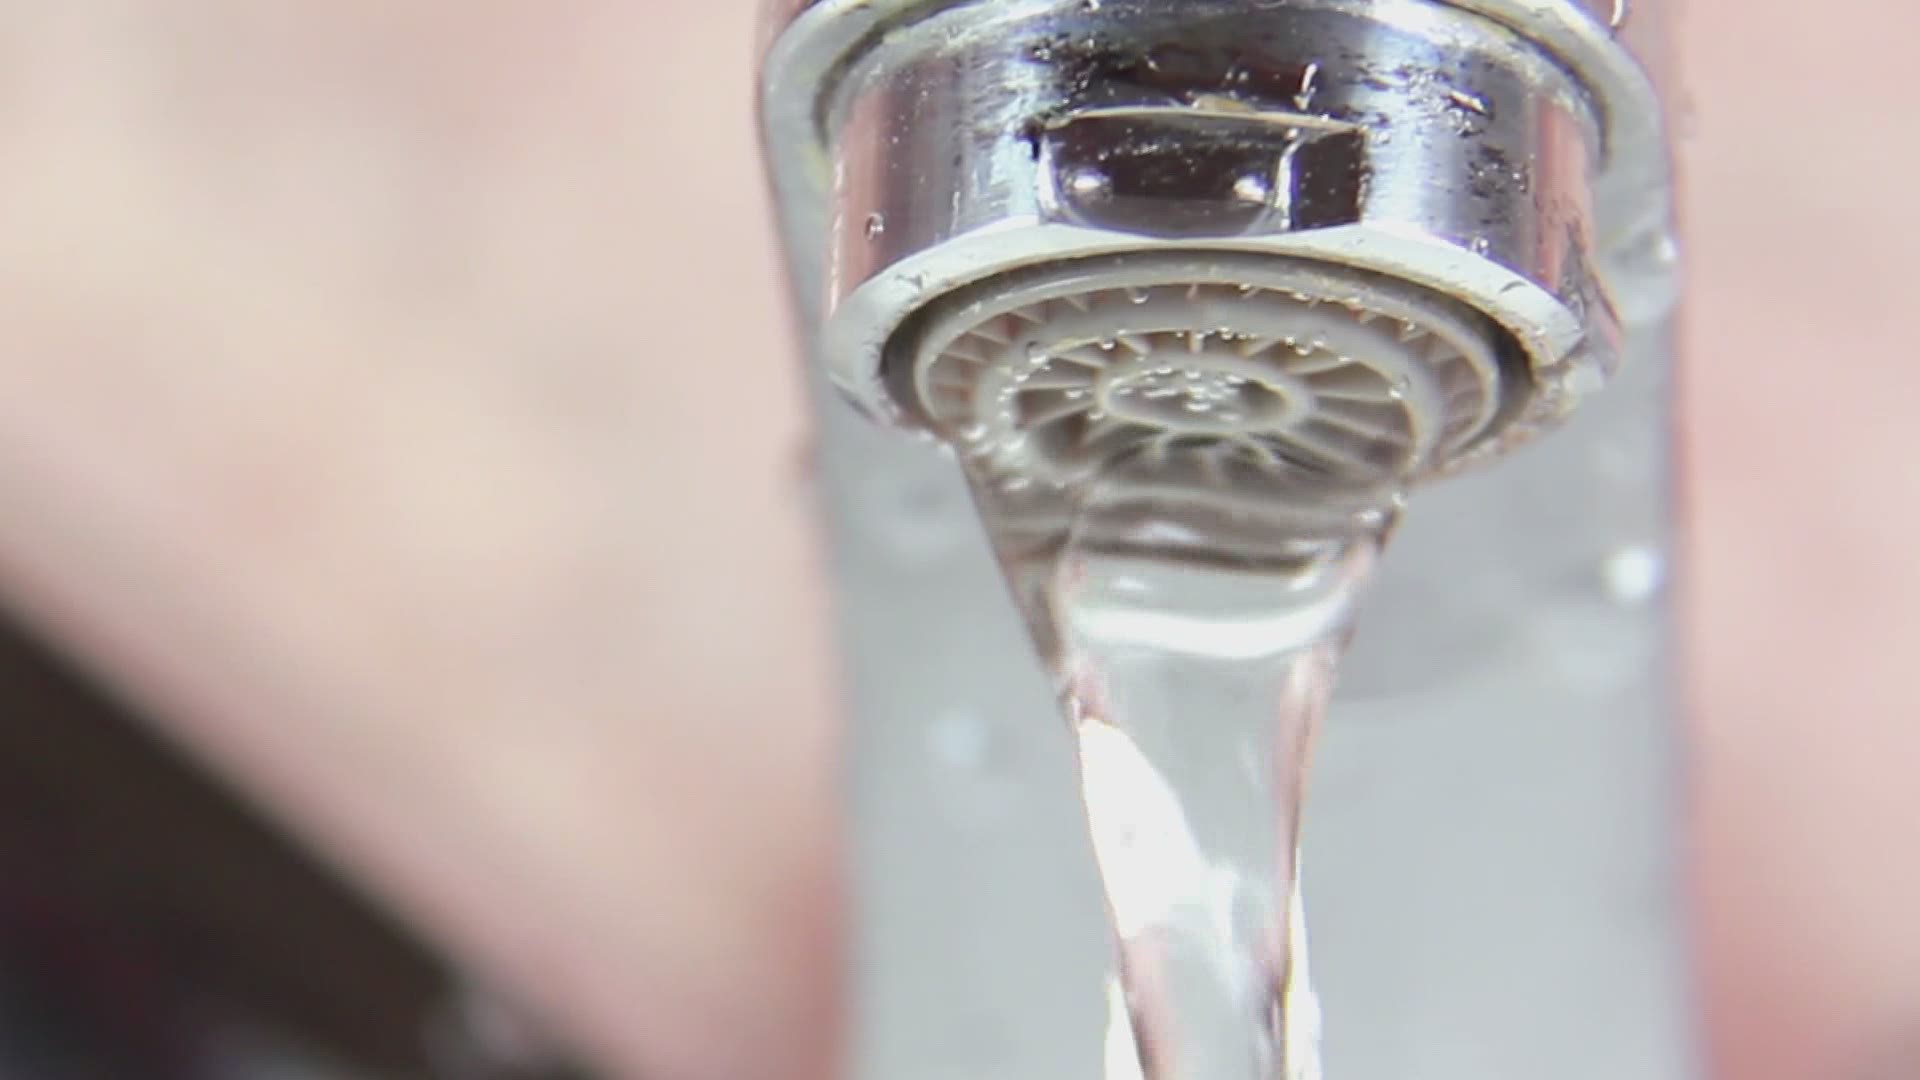 People in one west side neighborhood are voicing concerns about the taste of their tap water.